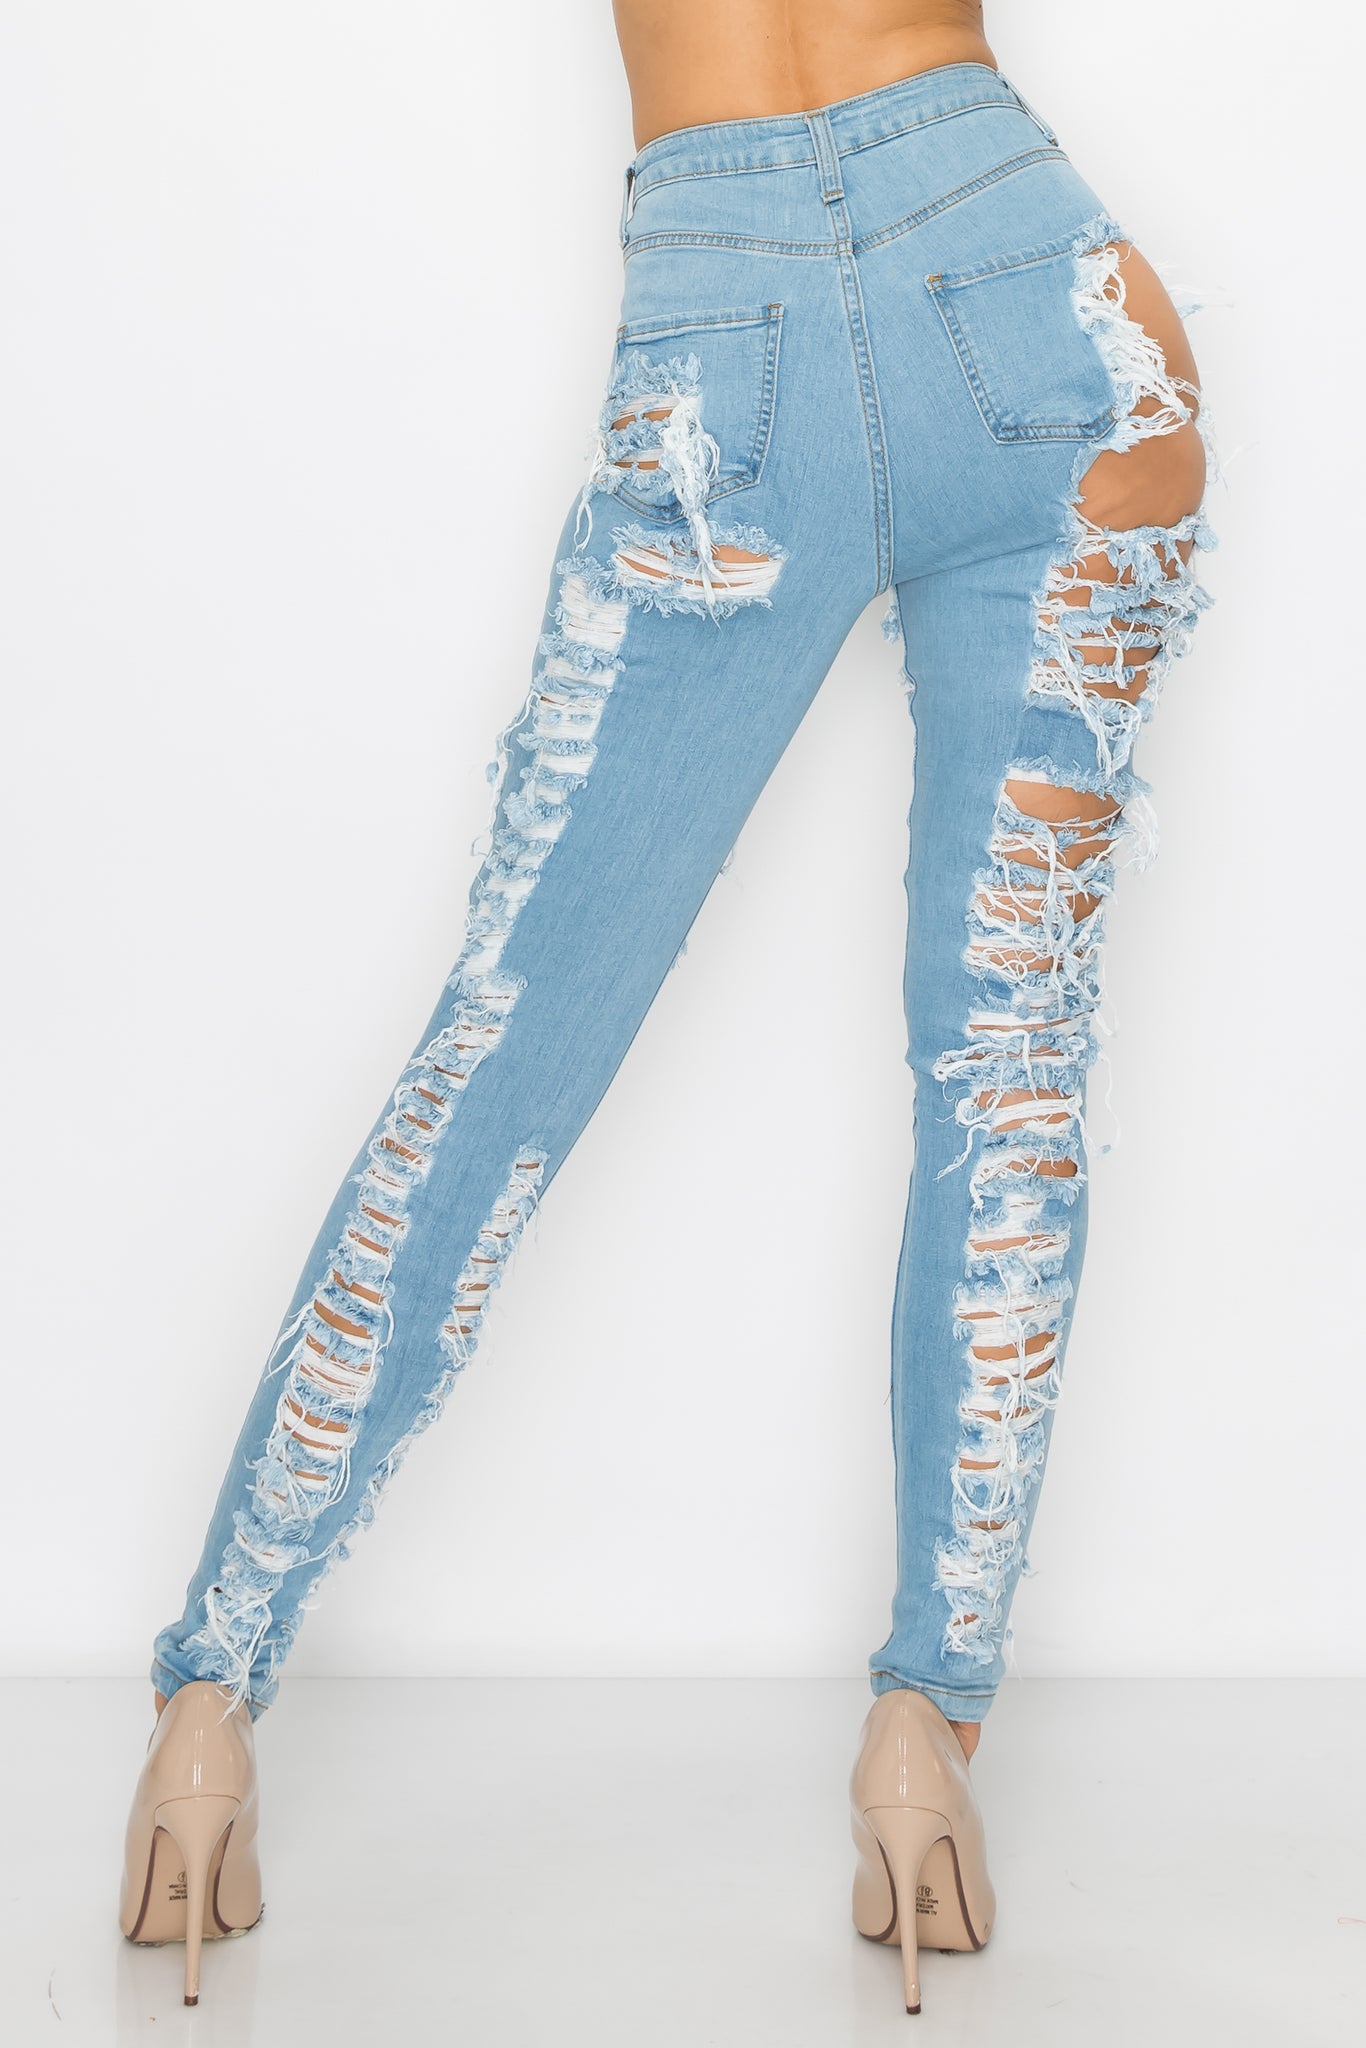 Aphrodite High Waisted Distressed Skinny Cut Outs – Aphrodite